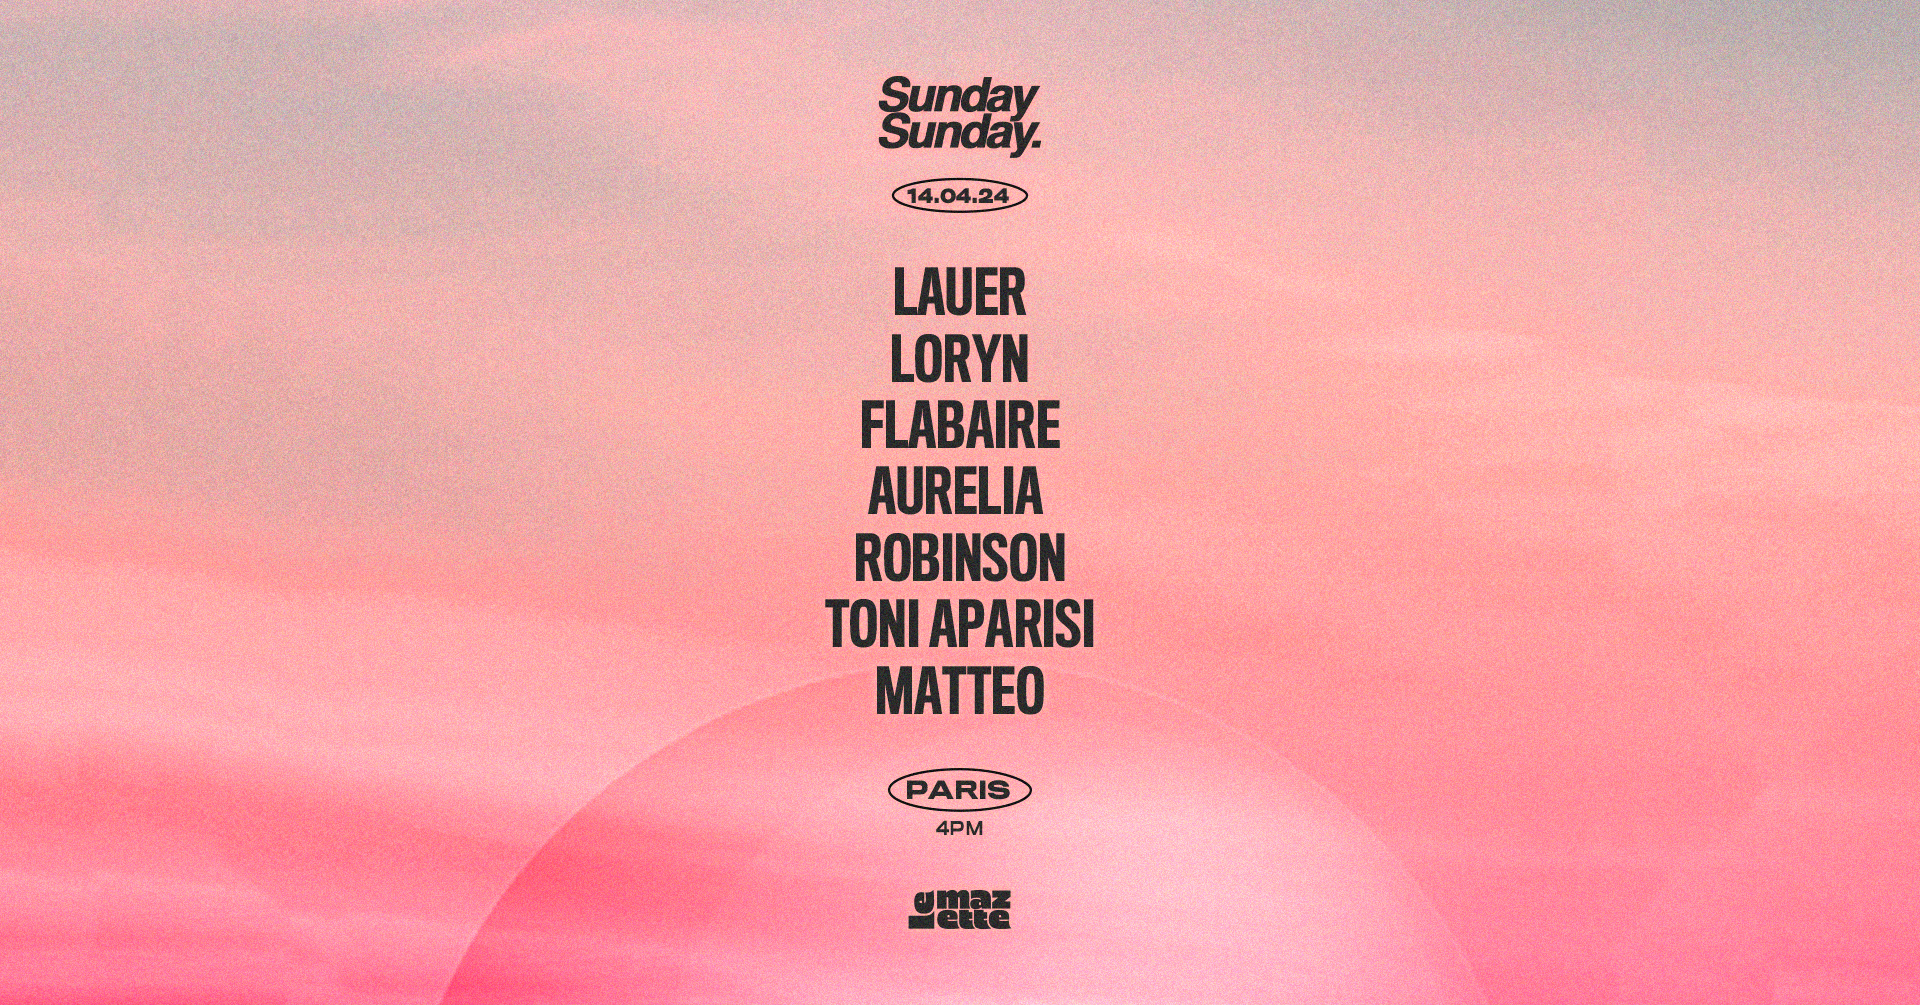 Sunday Sunday with Lauer, Flabaire, Loryn - Página frontal